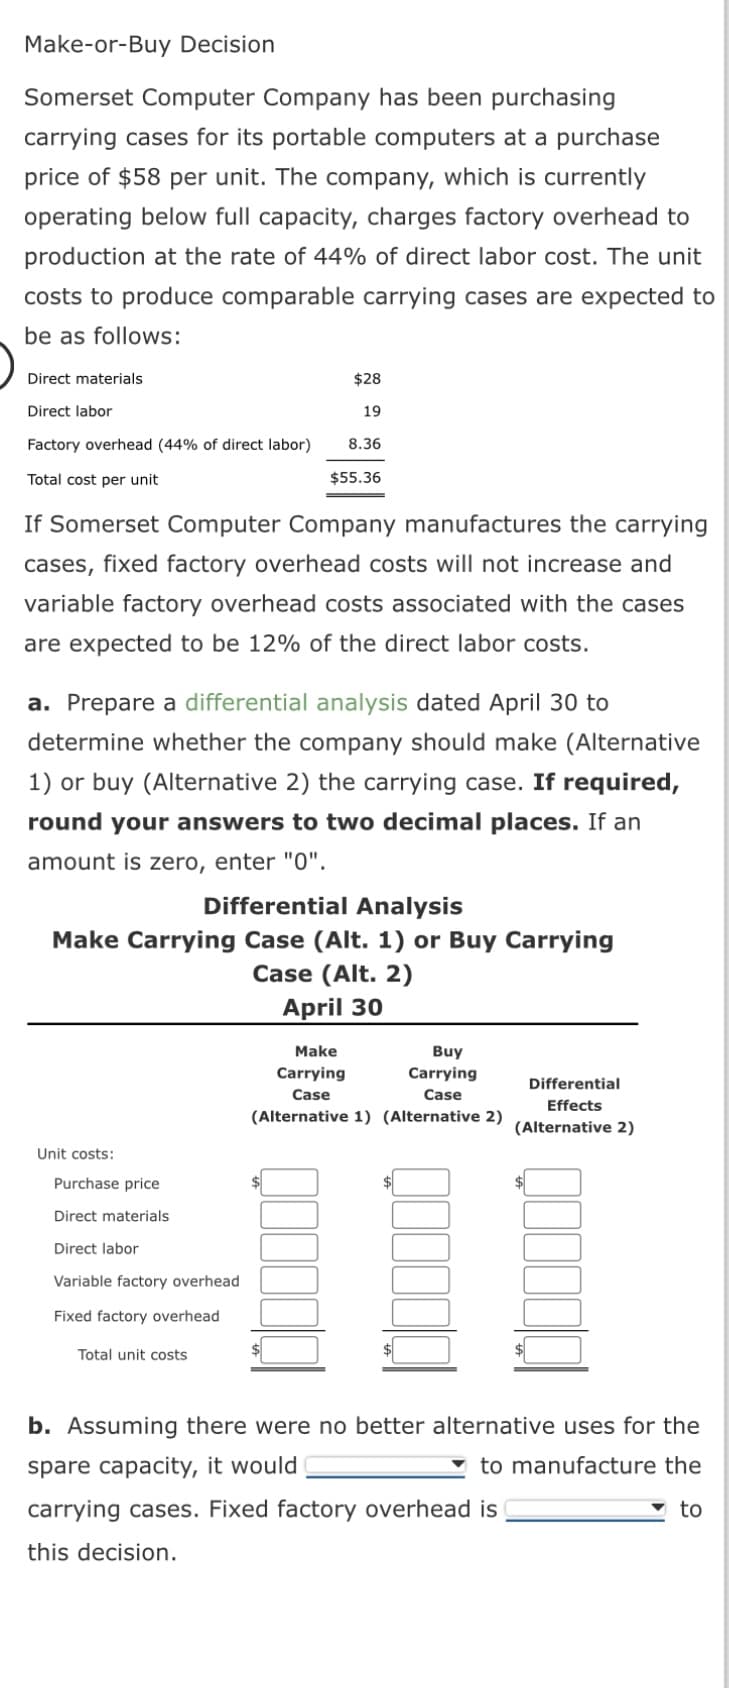 Make-or-Buy Decision
Somerset Computer Company has been purchasing
carrying cases for its portable computers at a purchase
price of $58 per unit. The company, which is currently
operating below full capacity, charges factory overhead to
production at the rate of 44% of direct labor cost. The unit
costs to produce comparable carrying cases are expected to
be as follows:
Direct materials
Direct labor
Factory overhead (44% of direct labor)
Total cost per unit
If Somerset Computer Company manufactures the carrying
cases, fixed factory overhead costs will not increase and
variable factory overhead costs associated with the cases
are expected to be 12% of the direct labor costs.
$28
19
8.36
a. Prepare a differential analysis dated April 30 to
determine whether the company should make (Alternative
1) or buy (Alternative 2) the carrying case. If required,
round your answers to two decimal places. If an
amount is zero, enter "0".
Unit costs:
$55.36
Differential Analysis
Make Carrying Case (Alt. 1) or Buy Carrying
Case (Alt. 2)
April 30
Purchase price
Direct materials
Direct labor
Variable factory overhead
Fixed factory overhead
Total unit costs
Make
Buy
Carrying
Carrying
Case
Case
(Alternative 1) (Alternative 2)
Differential
Effects
(Alternative 2)
carrying cases. Fixed factory overhead is
this decision.
$
b. Assuming there were no better alternative uses for the
spare capacity, it would
to manufacture the
to